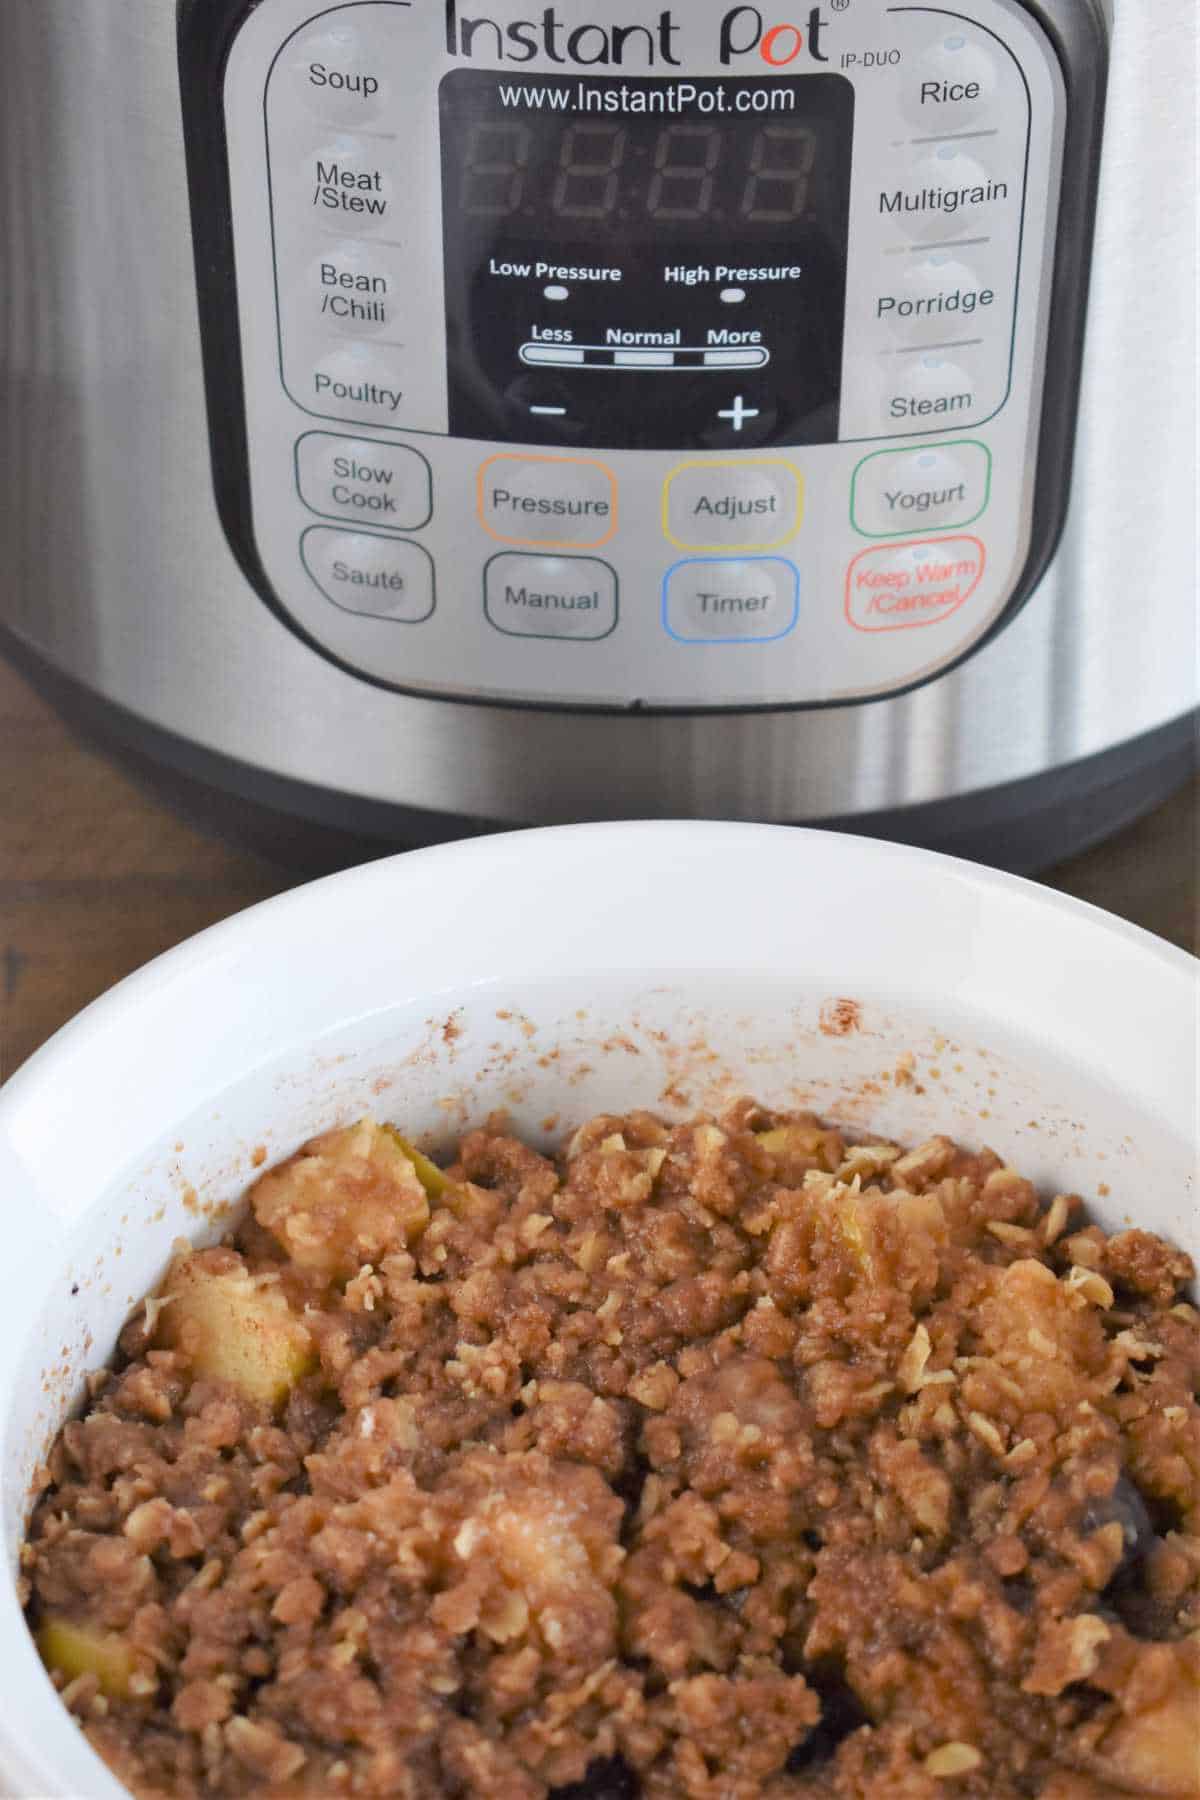 Instant pot with casserole of crumble topped apple and blueberry cobbler.